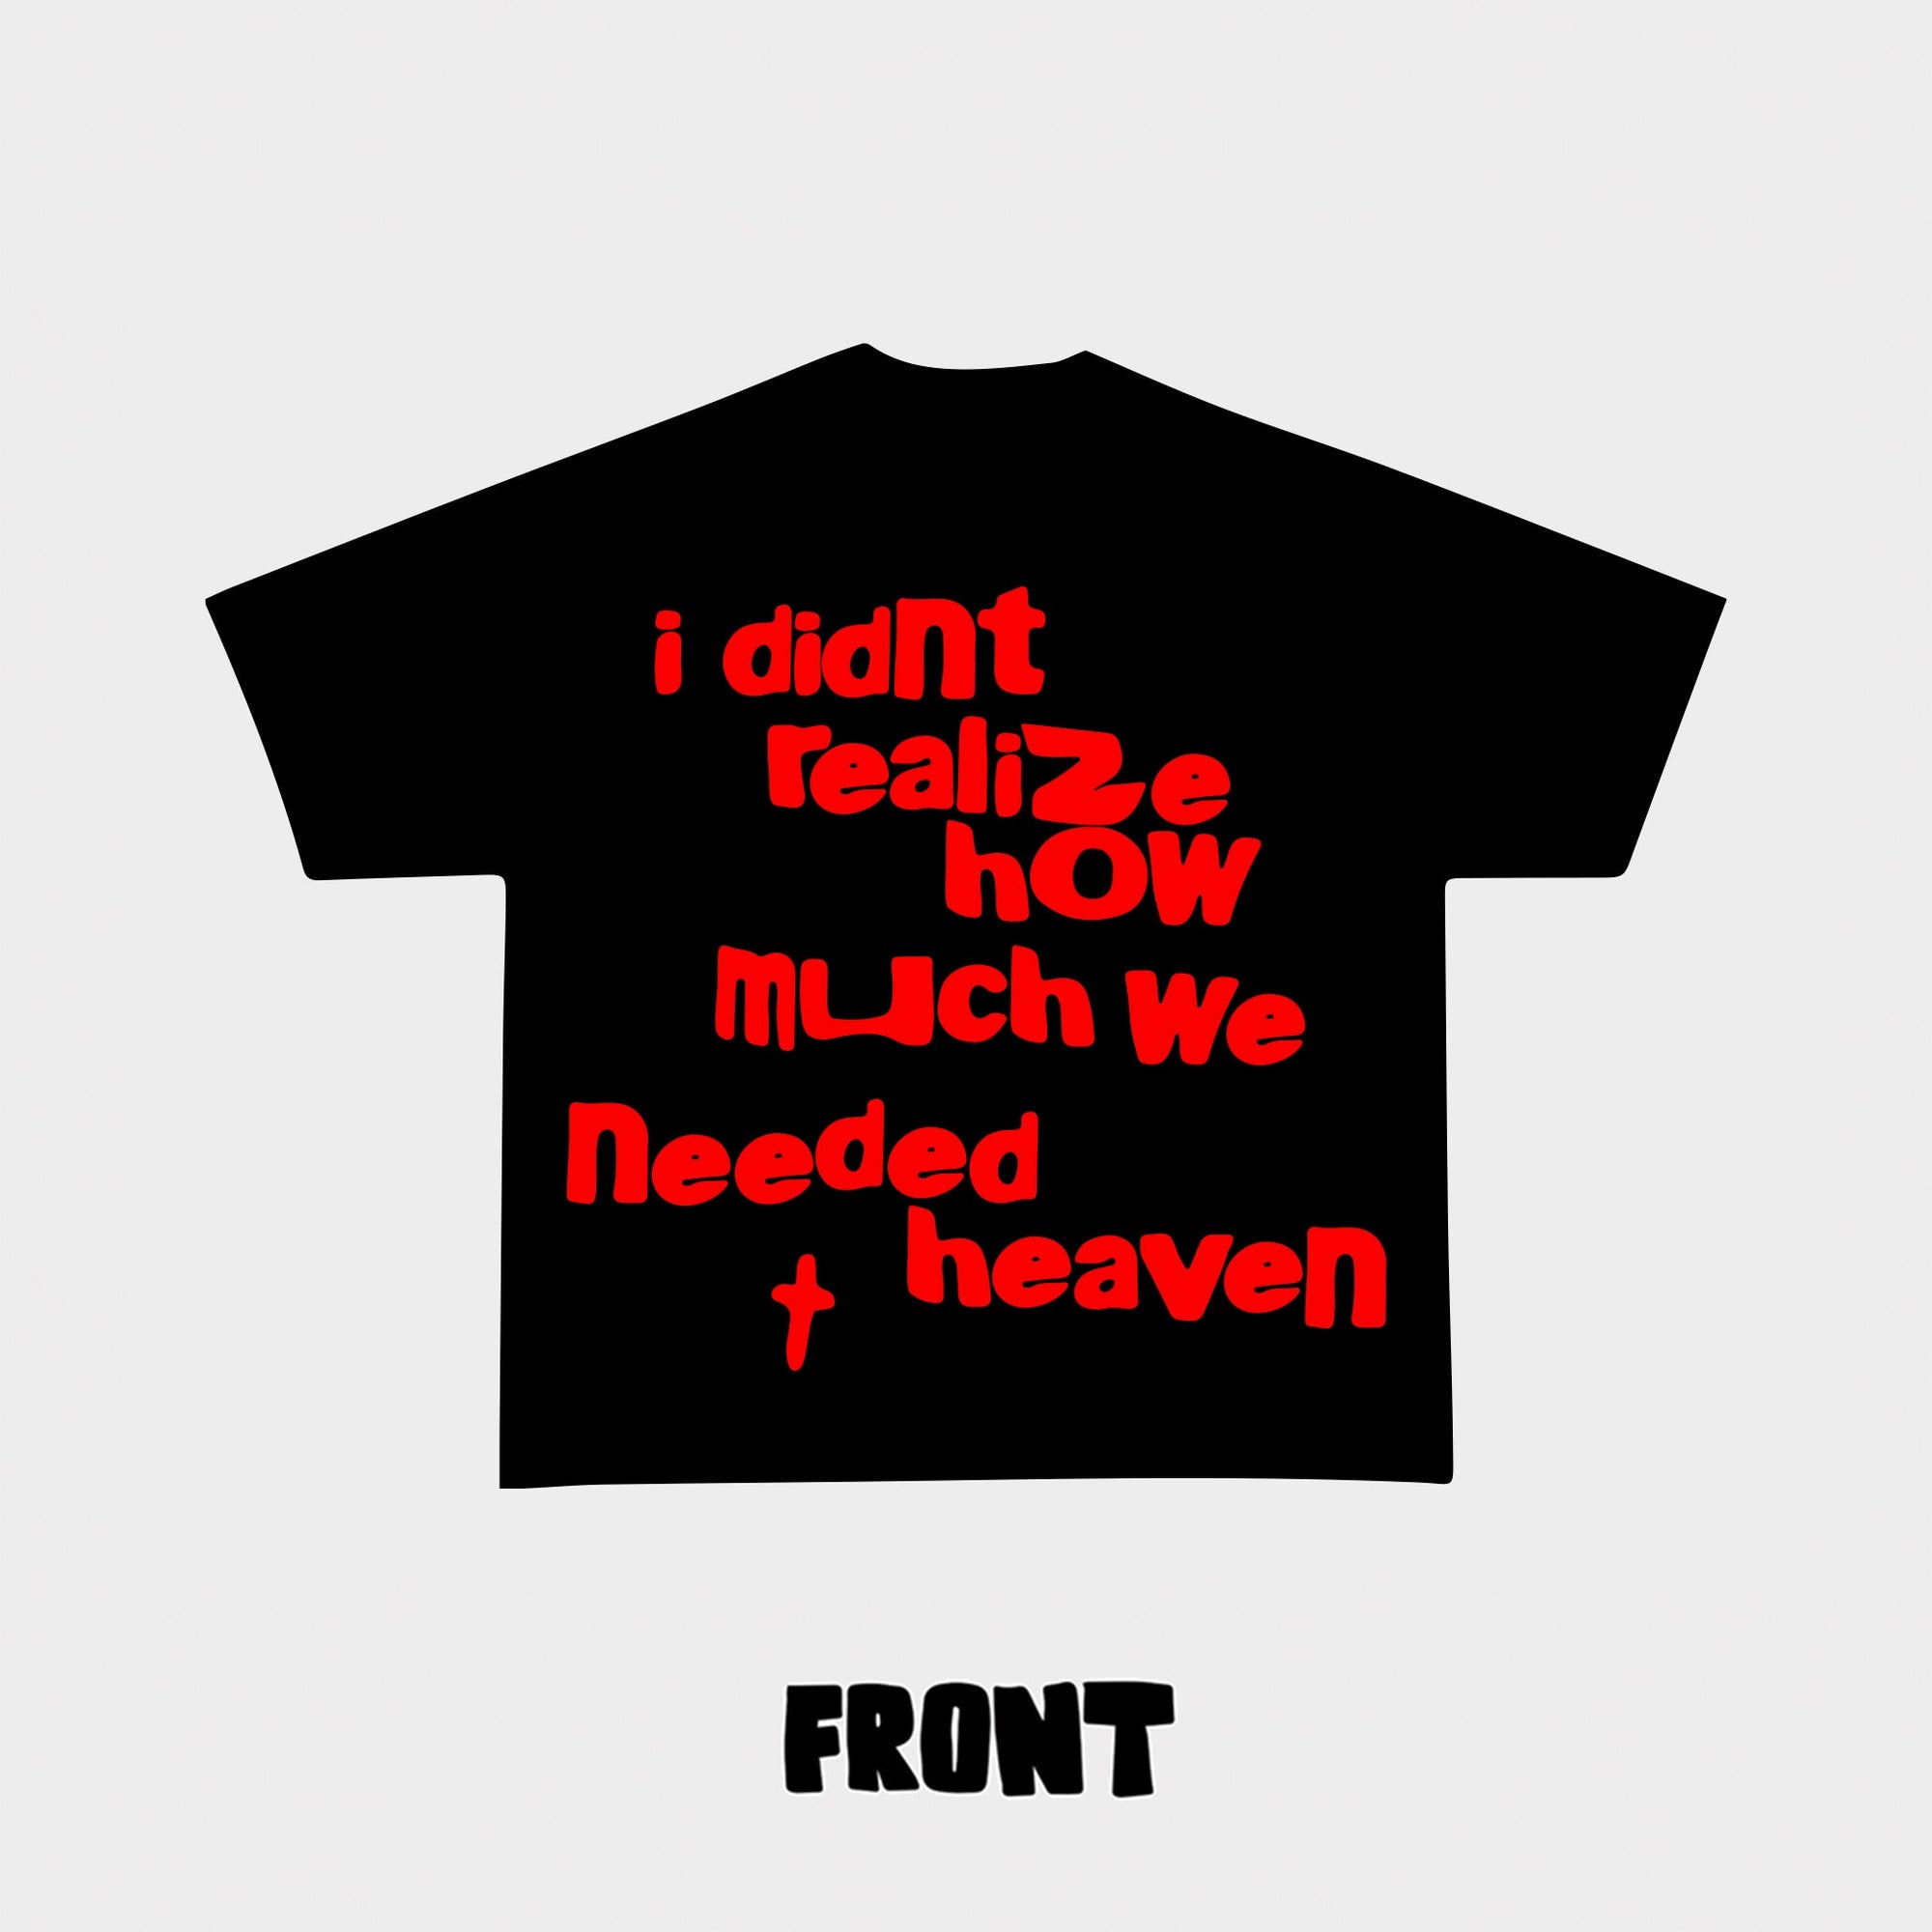 "We Need Heaven" Tee - RED LETTERS